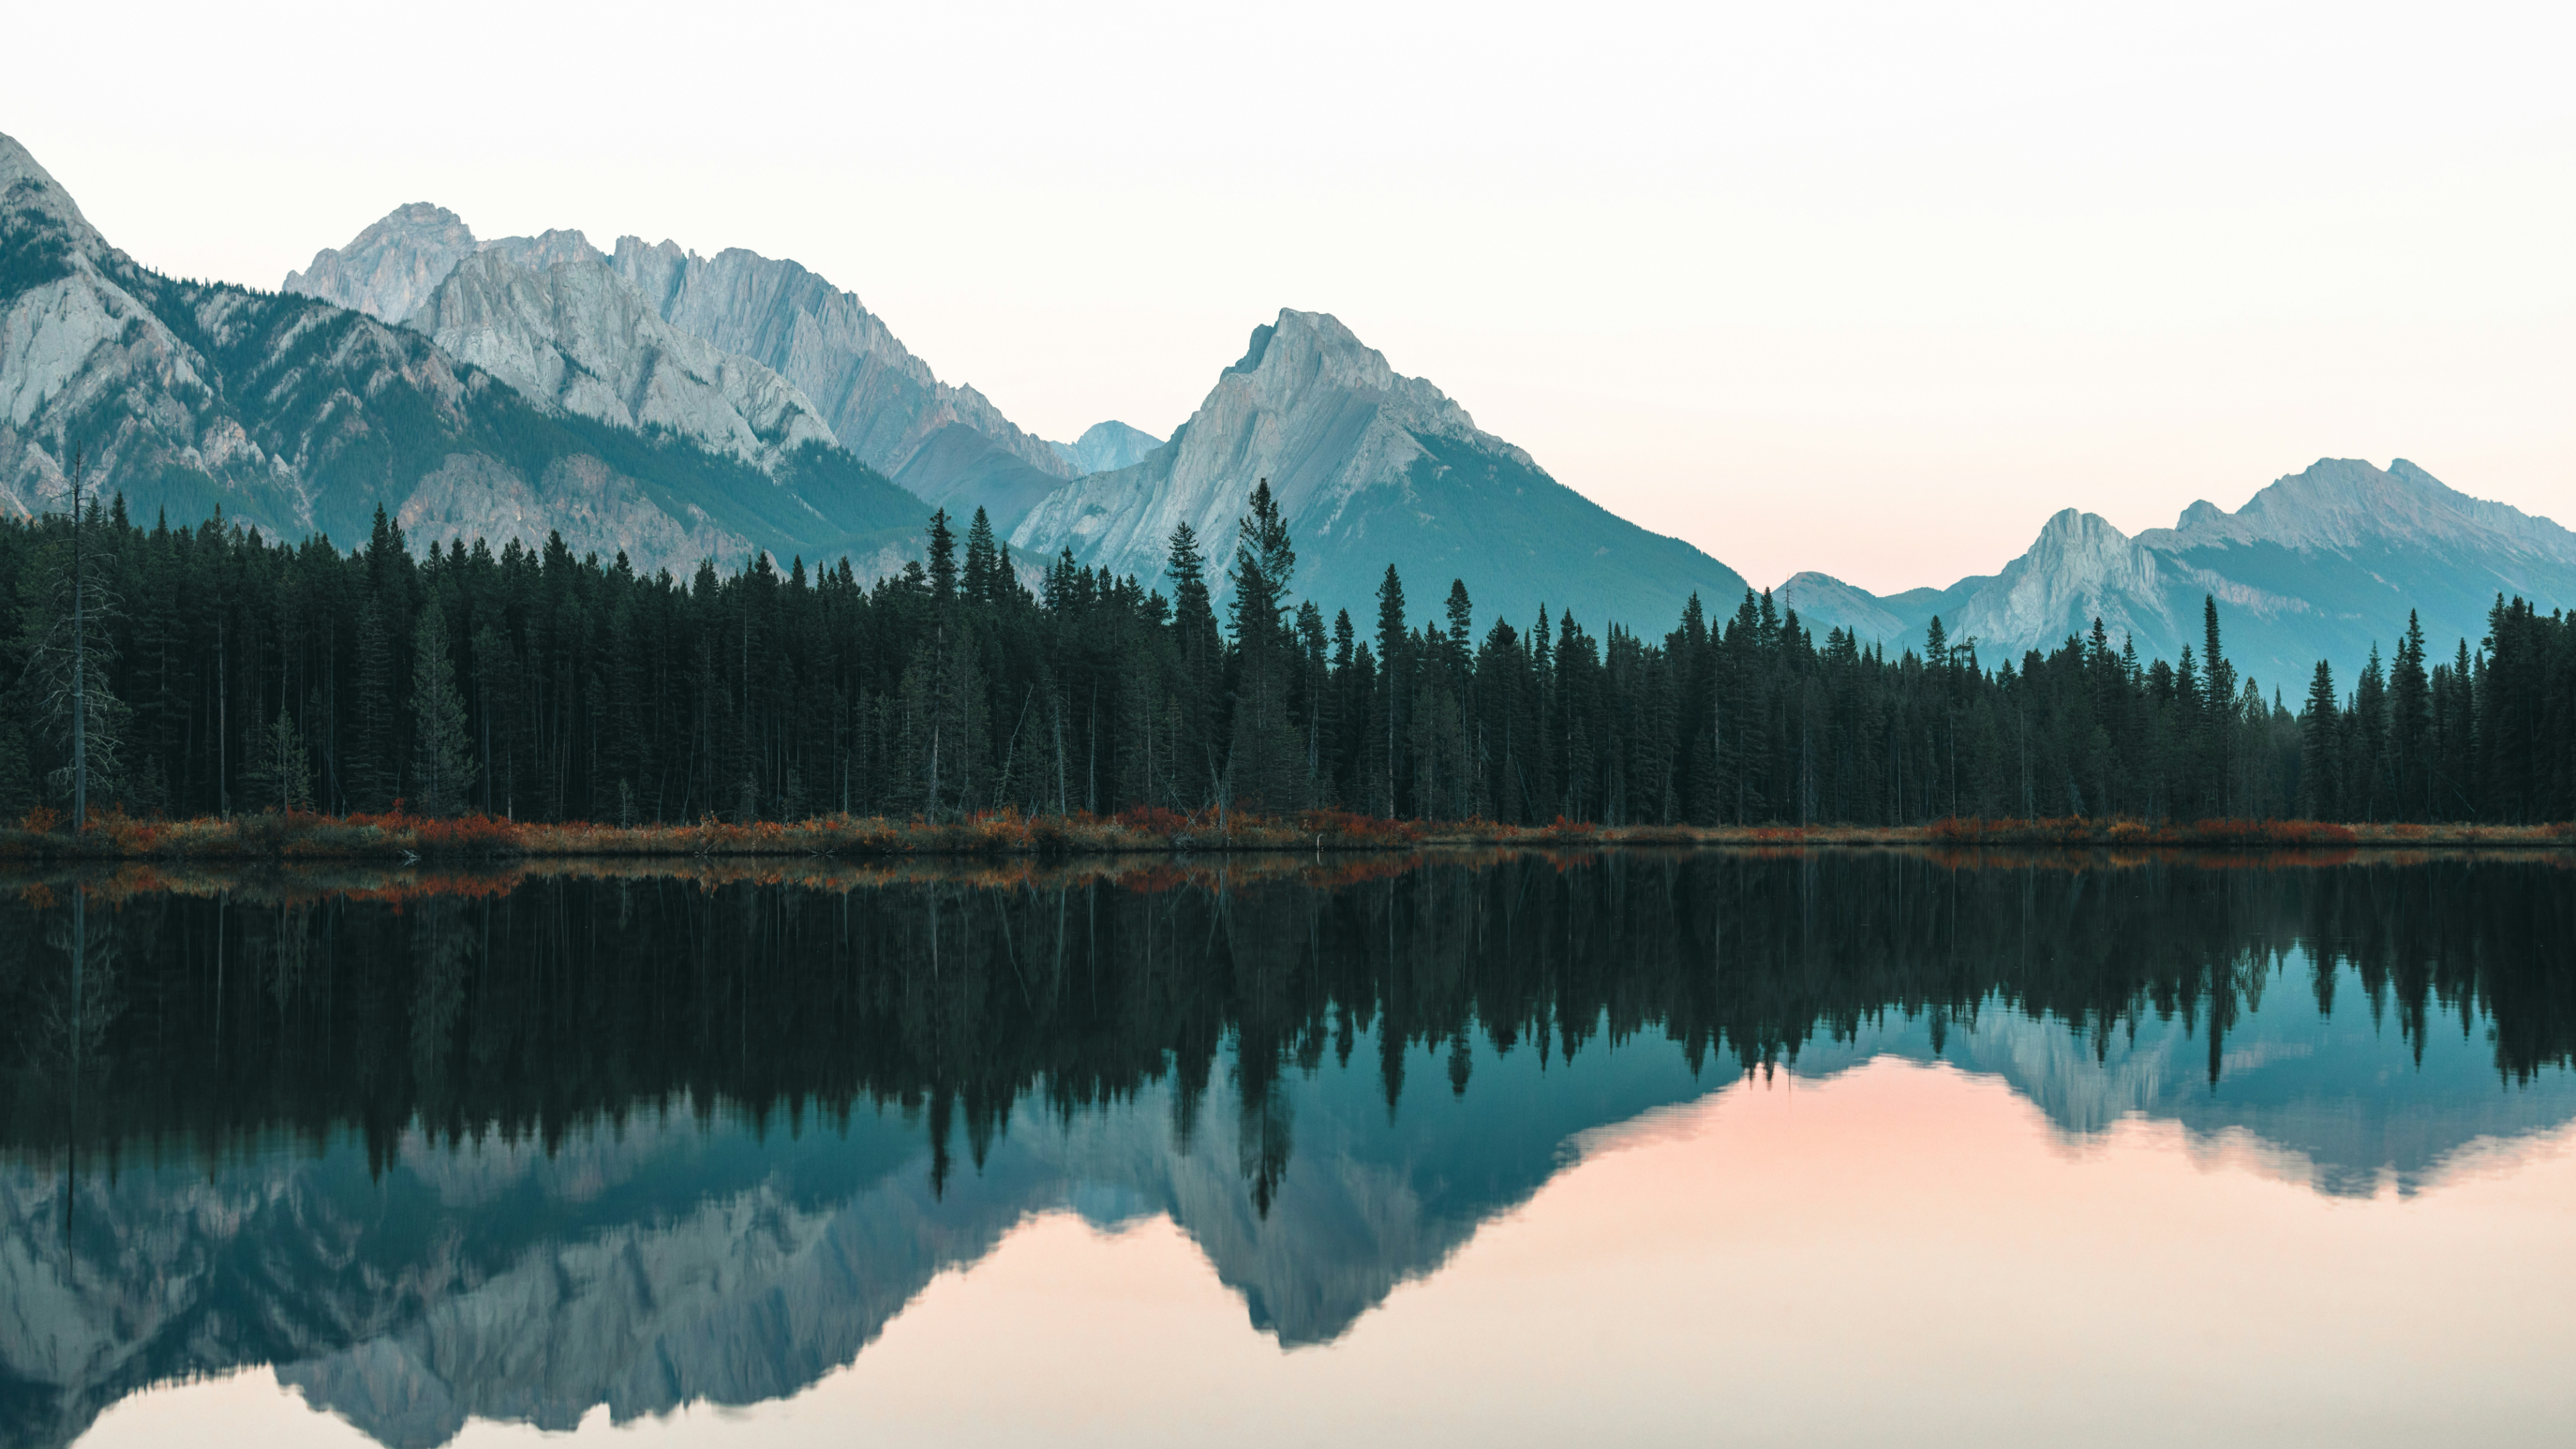 General 3840x2160 nature landscape mountains trees pine trees lake reflection water forest Alberta Canada